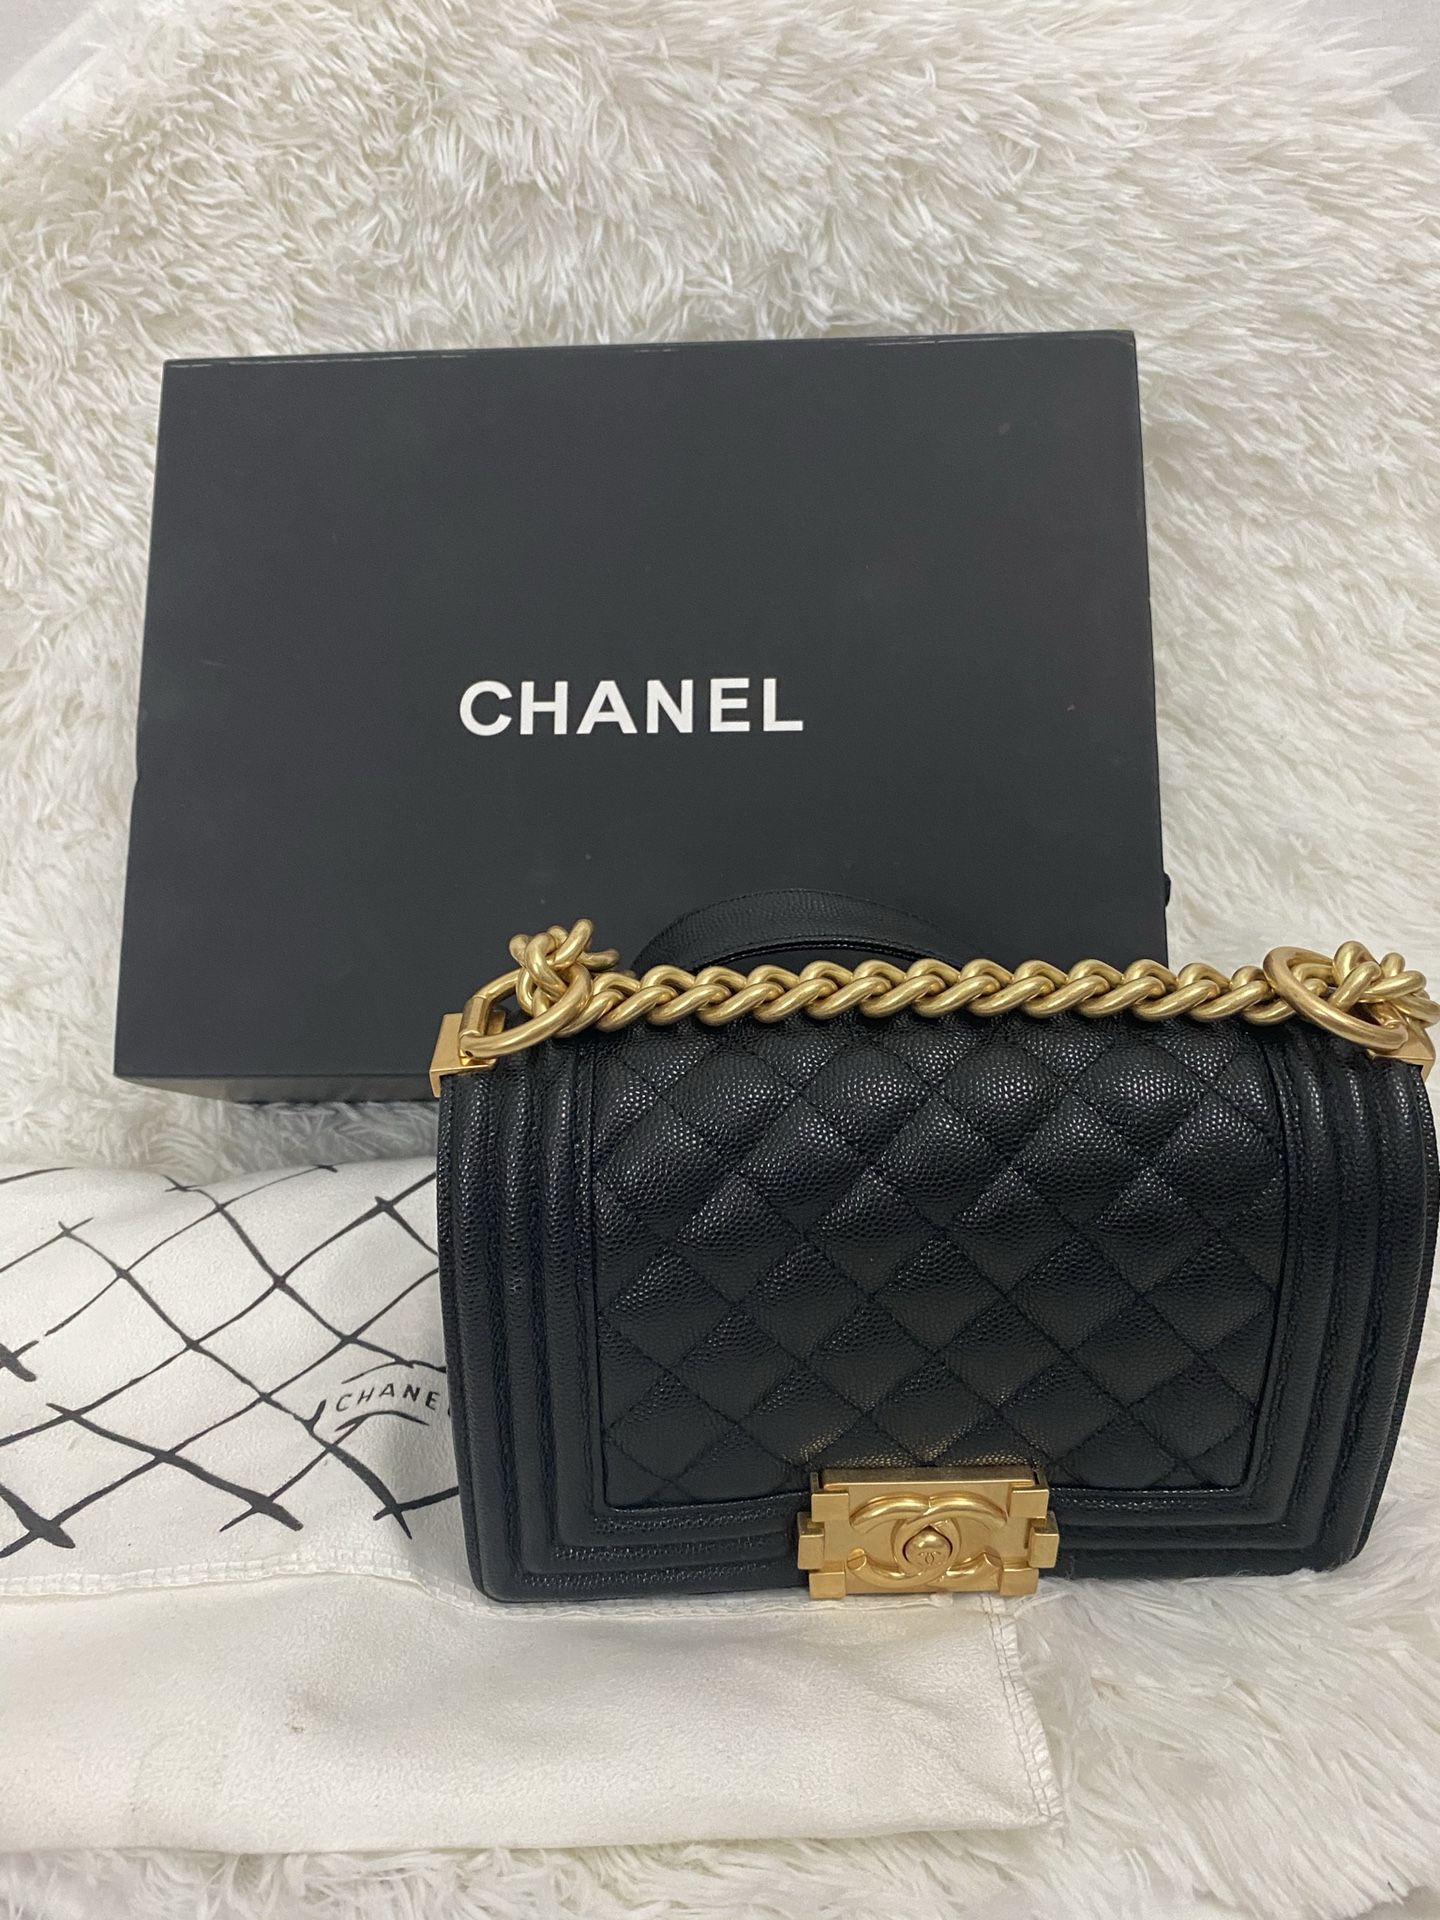 CHANEL Lambskin Quilted Boy Flap